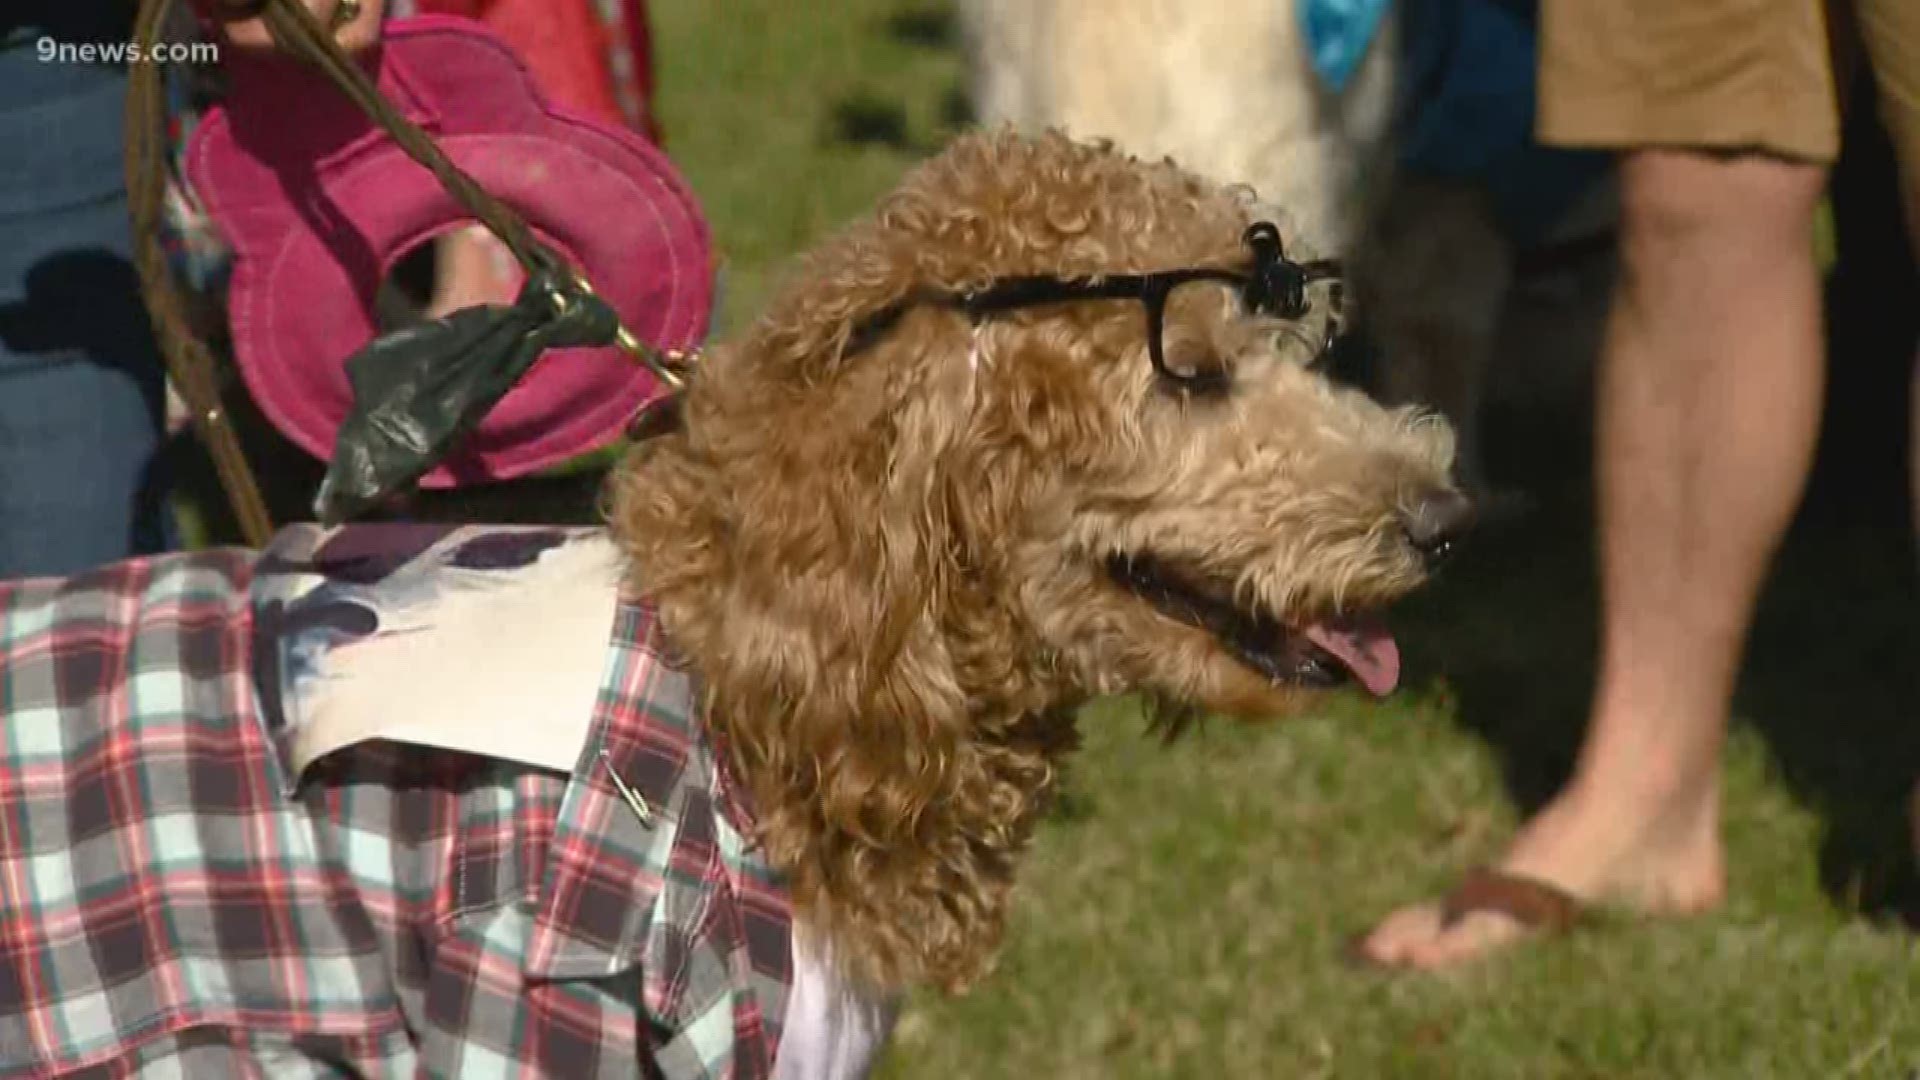 More than 150 dogs strutted their stuff at the Tennyson Street Pet Parade and Costume Contest Saturday